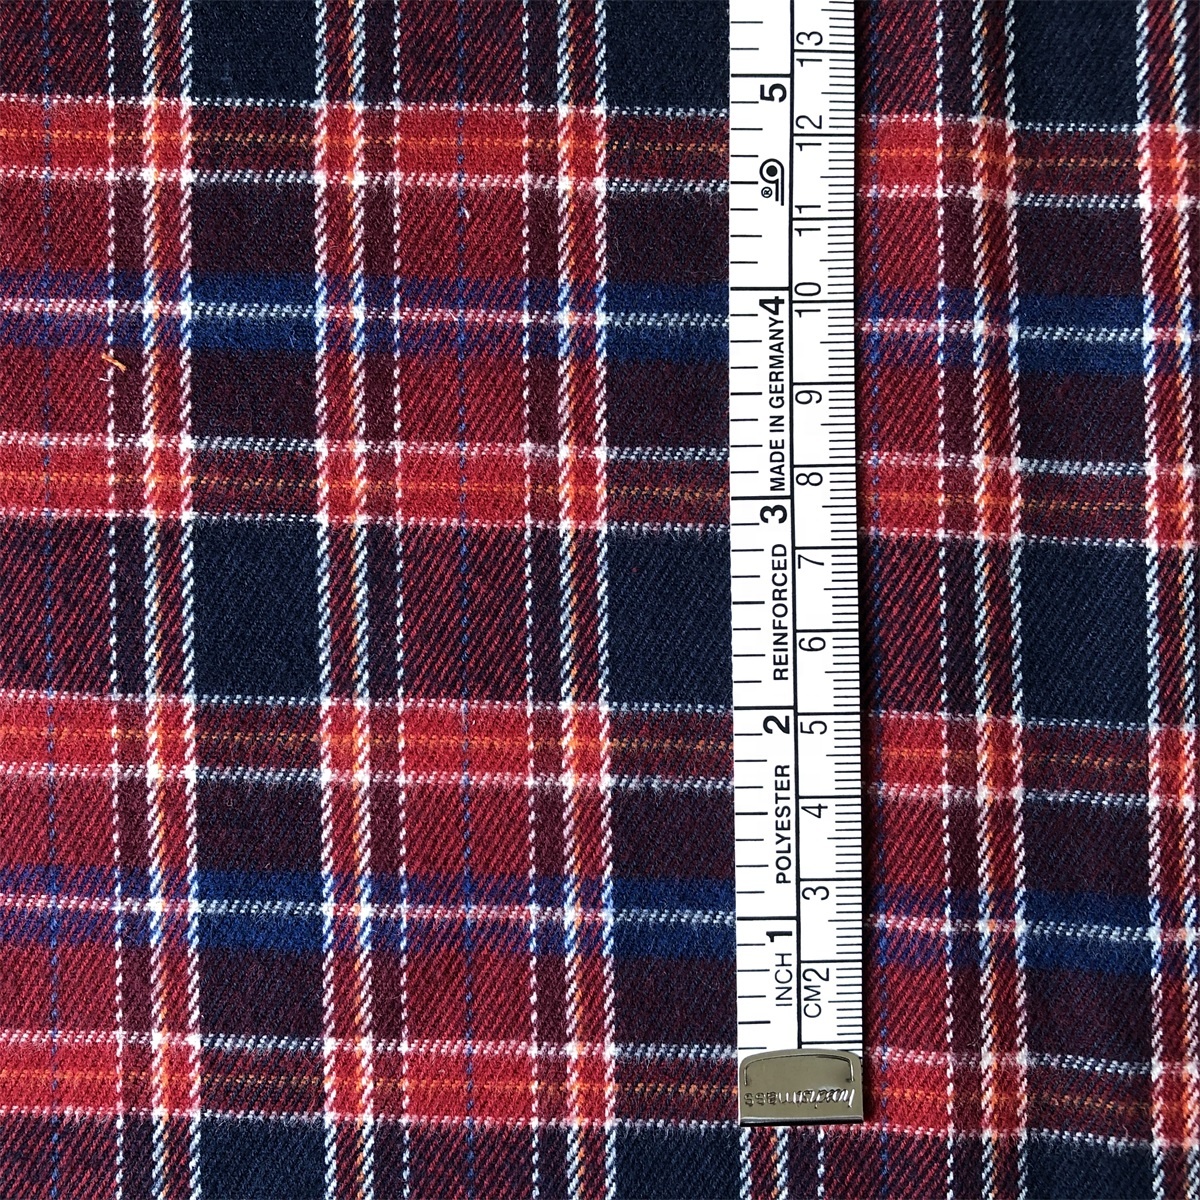 China cotton flannel yarn dyed twill woven check clothes and shirts fabric manufacturer